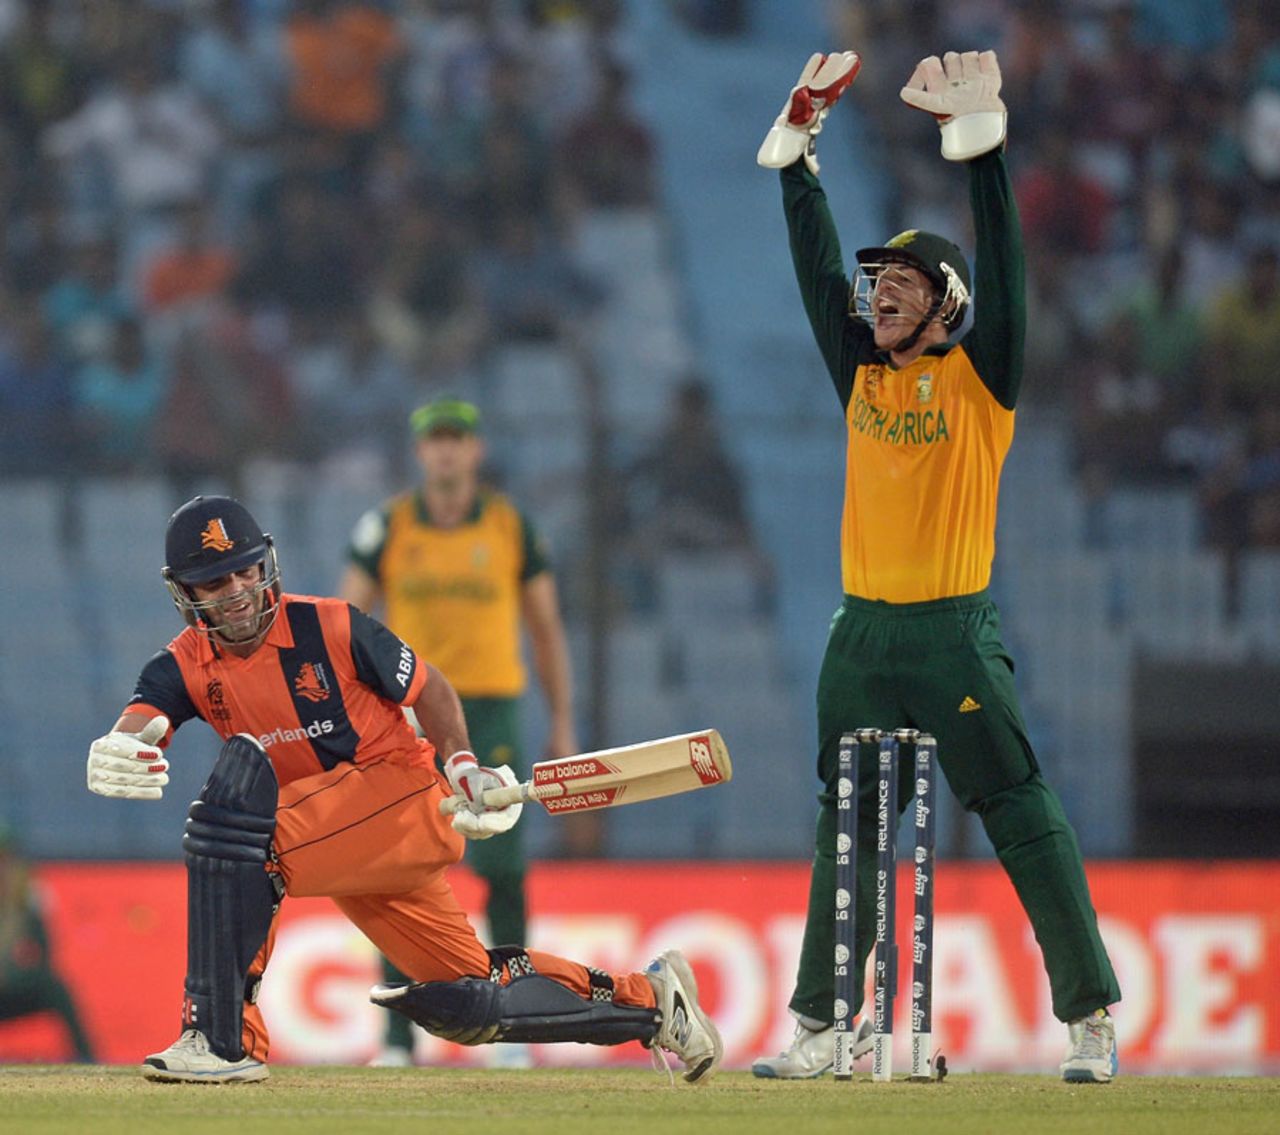 Quinton de Kock appeals successfully for an lbw against Peter Borren, Netherlands v South Africa, World T20, Group 1, Chittagong, March 27, 2014